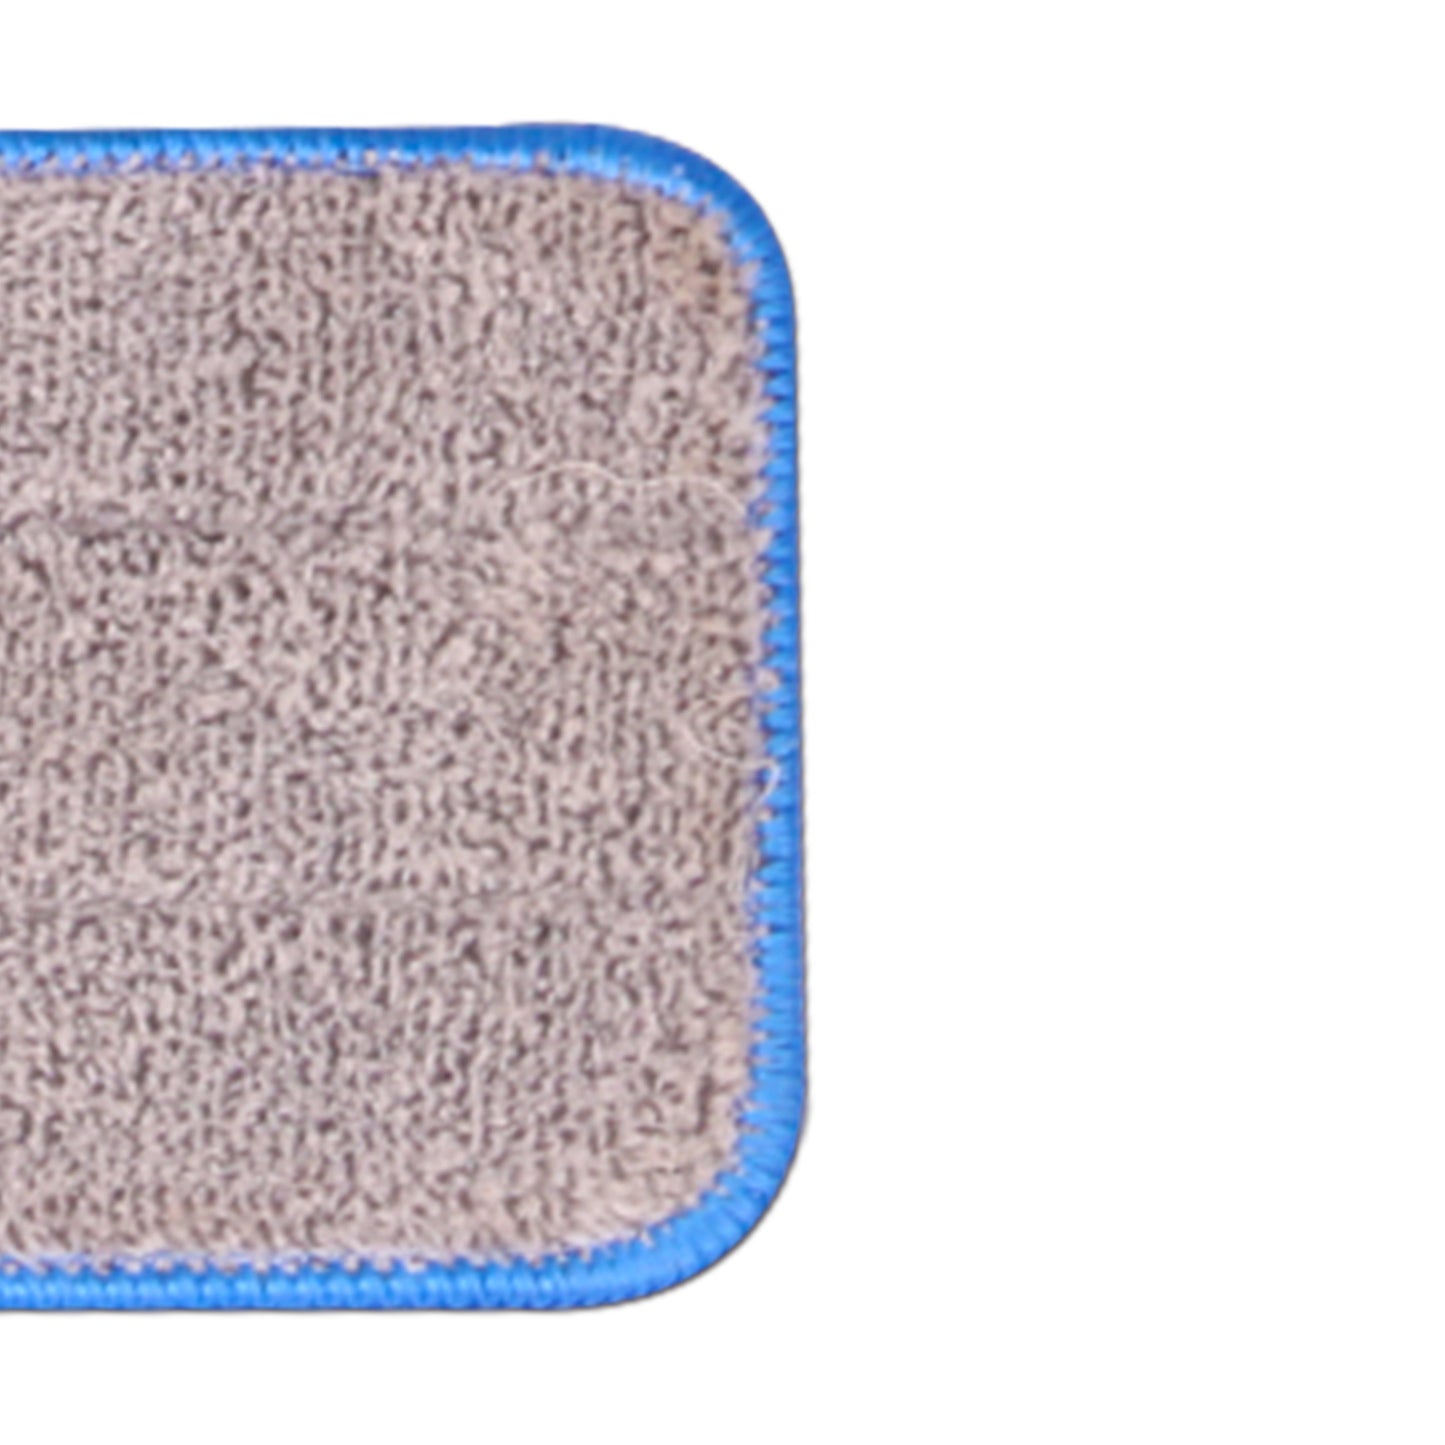 Cenocco Washable Microfiber Mop Replacement Pads